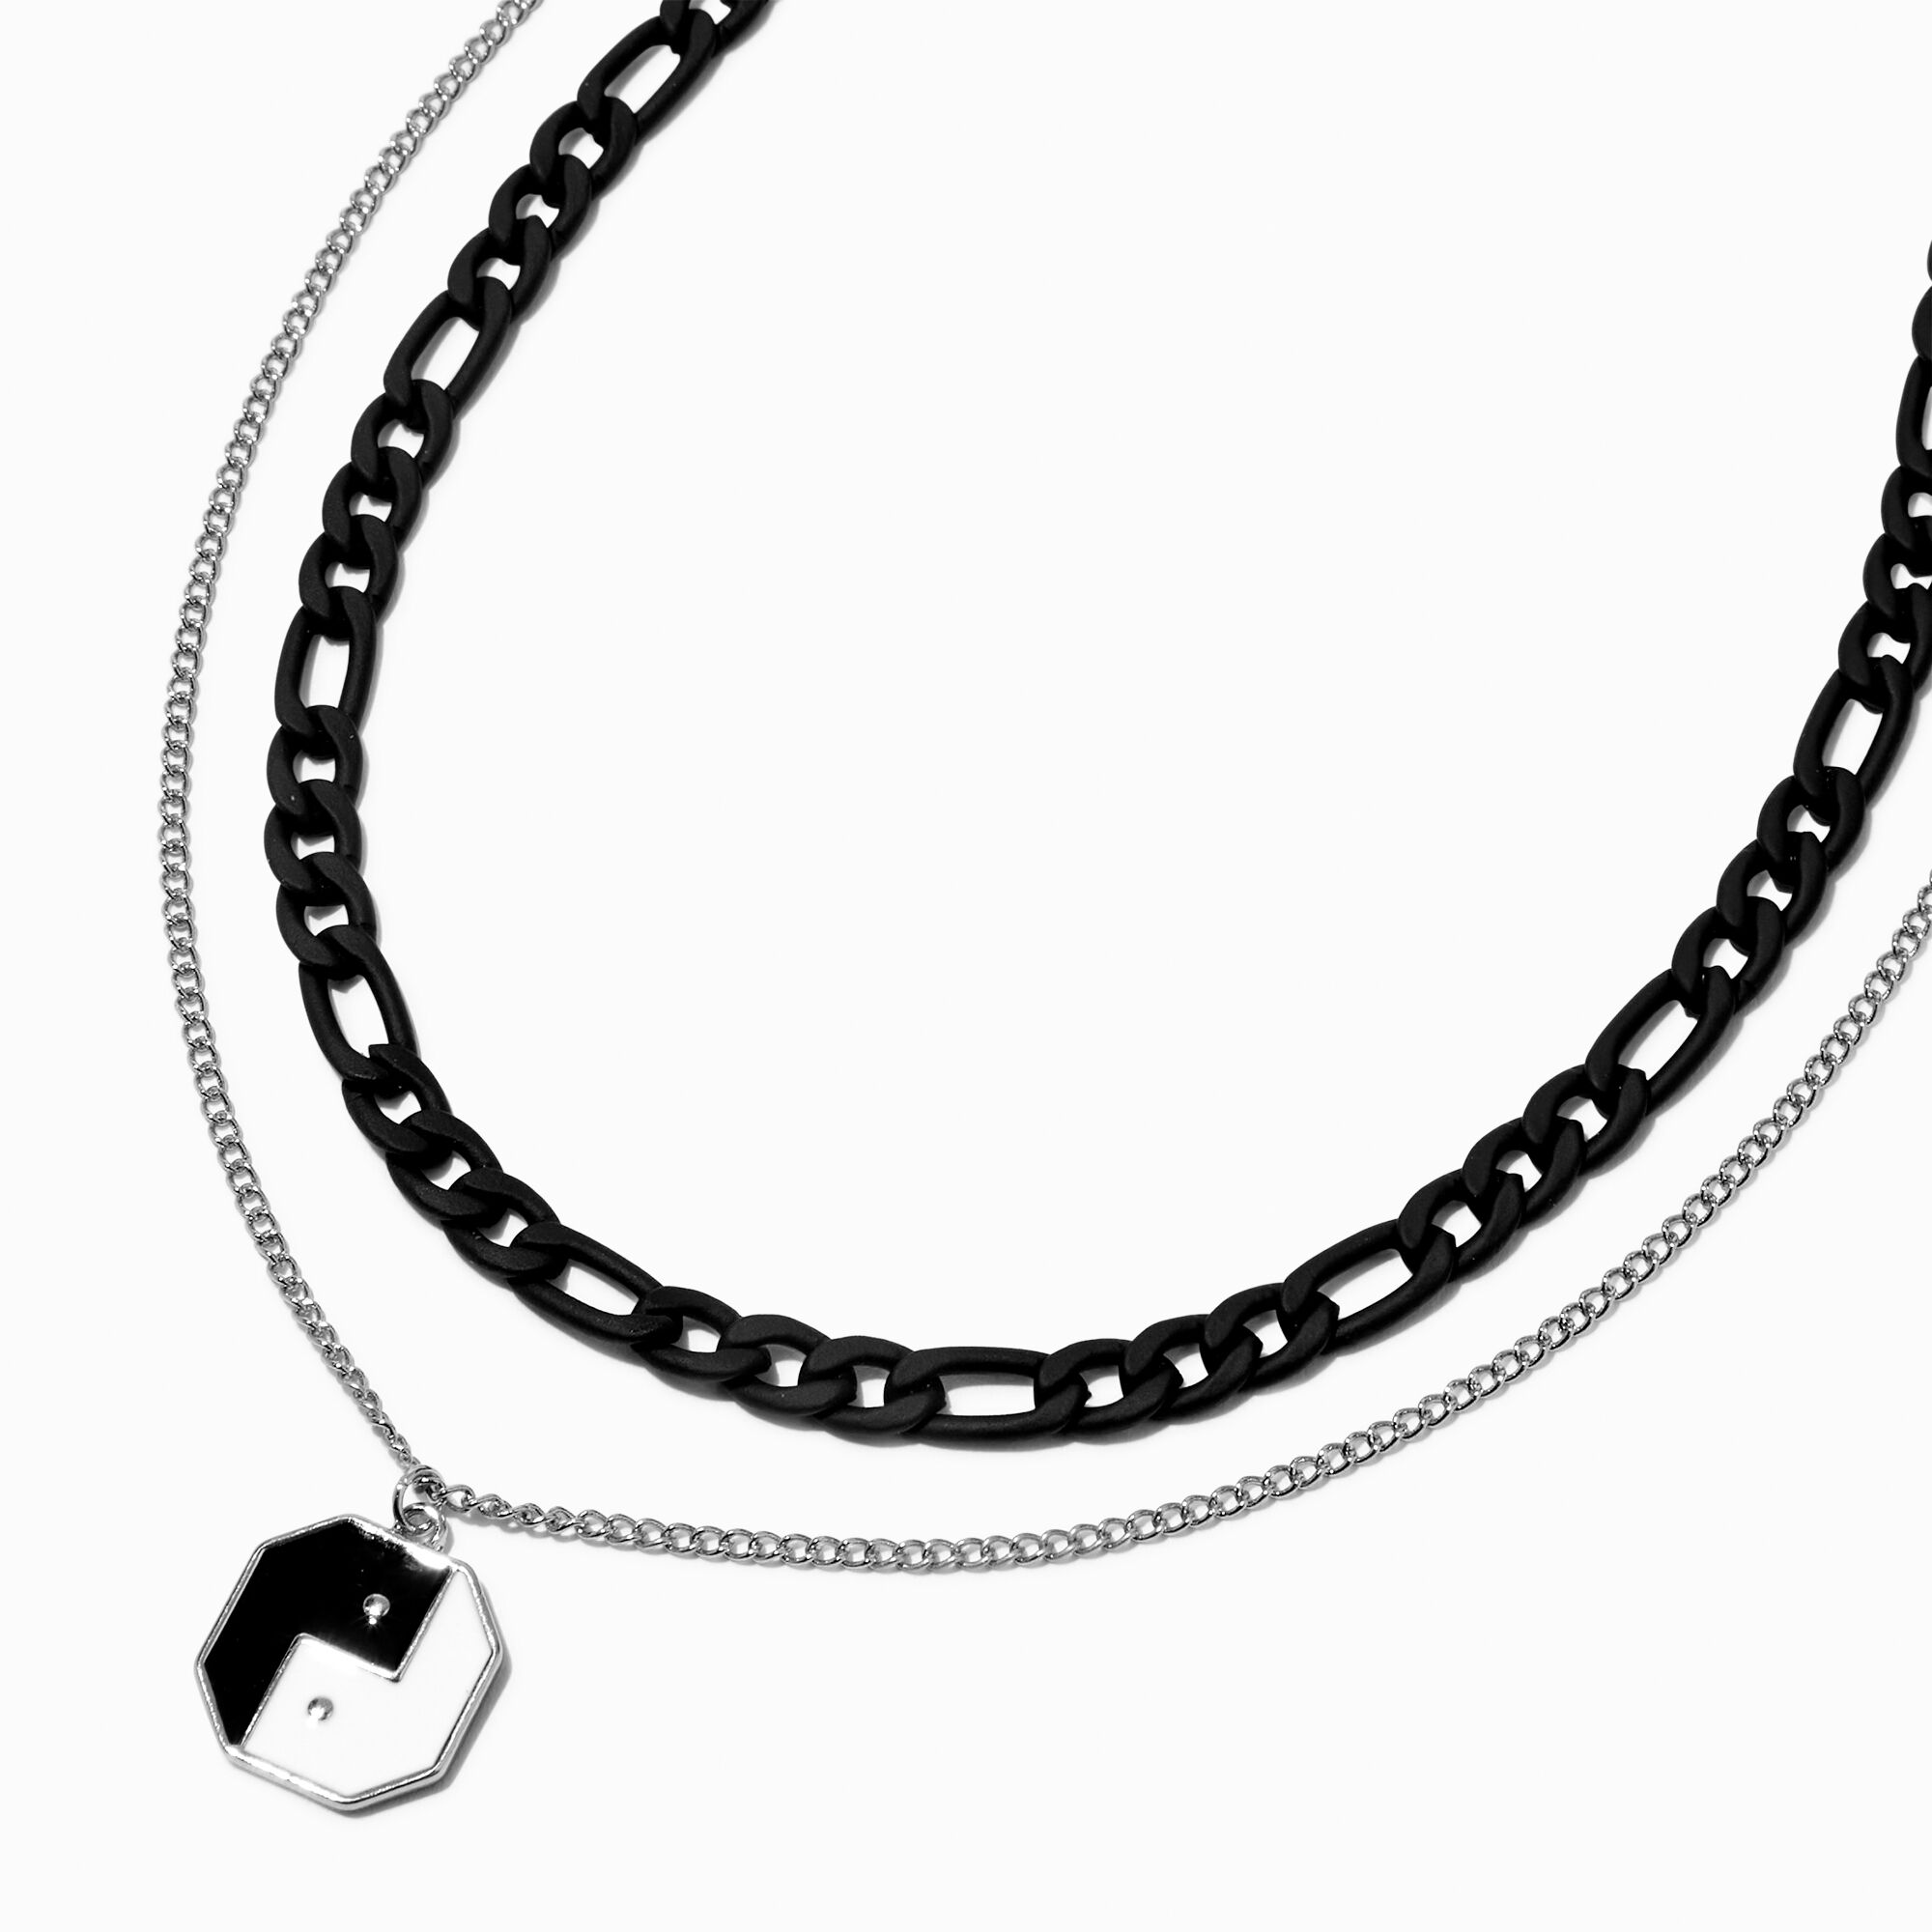 View Claires Mixed Metal Yin Yang Pendant Figora Chain Necklace Set 2 Pack Black information